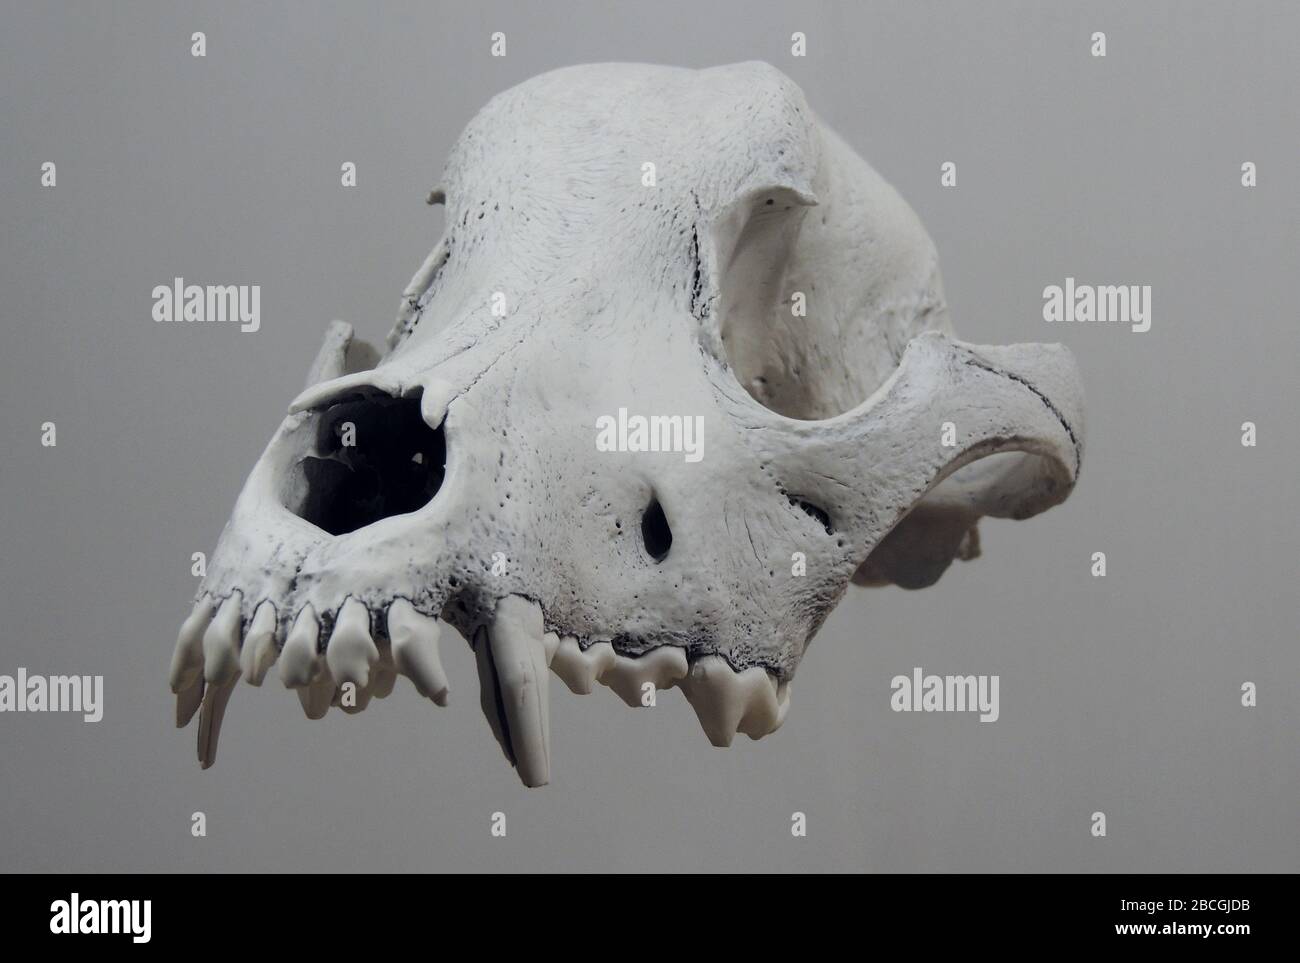 Floating Skull Of A Dog Without Lower Jaw Isolated Stock Photo - Alamy